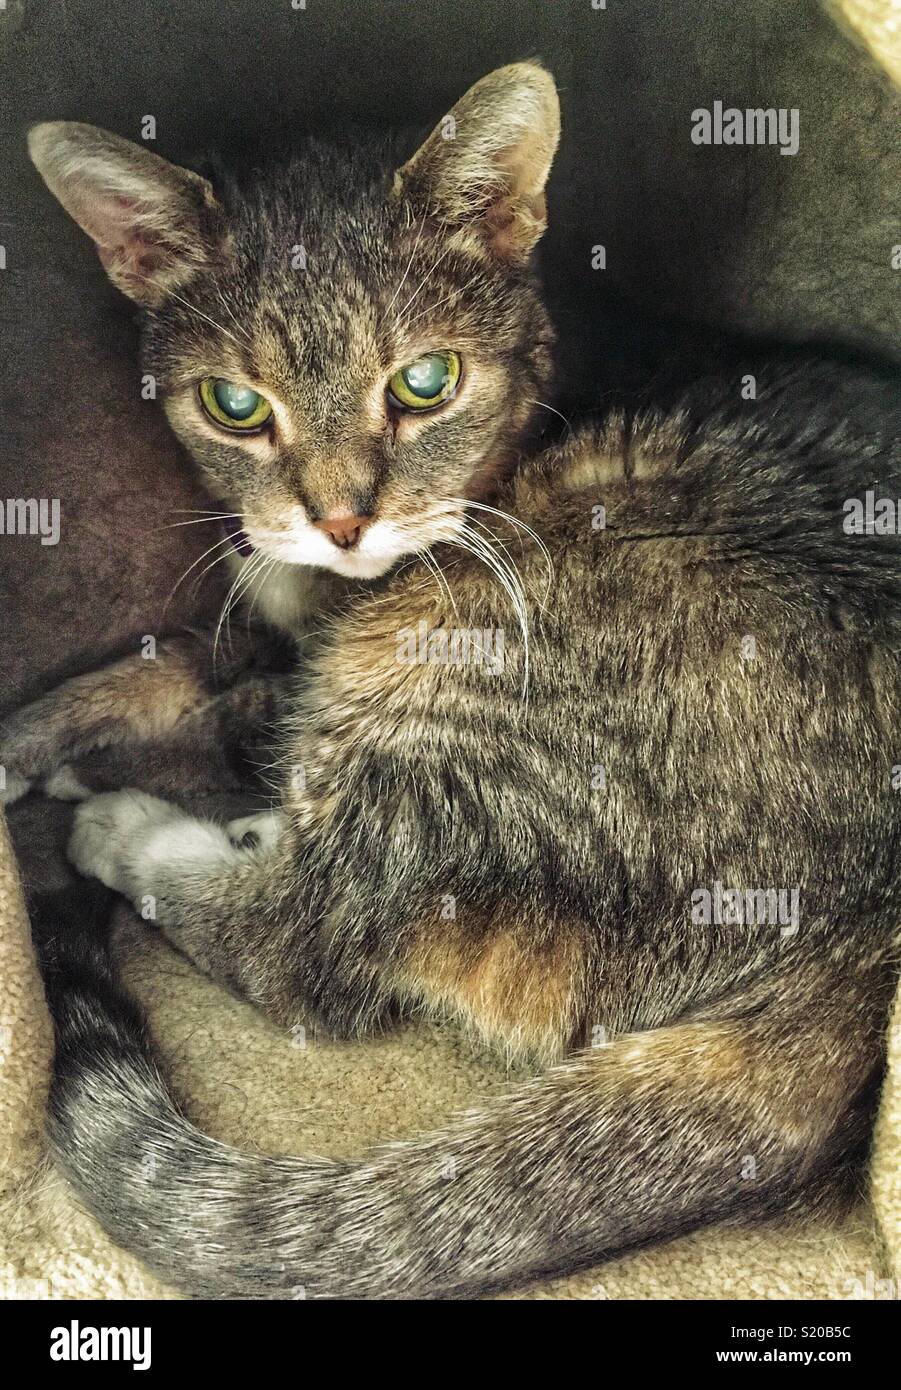 Elderly grey tabby cat with cataracts sitting in a cubby in a cat tree Stock Photo